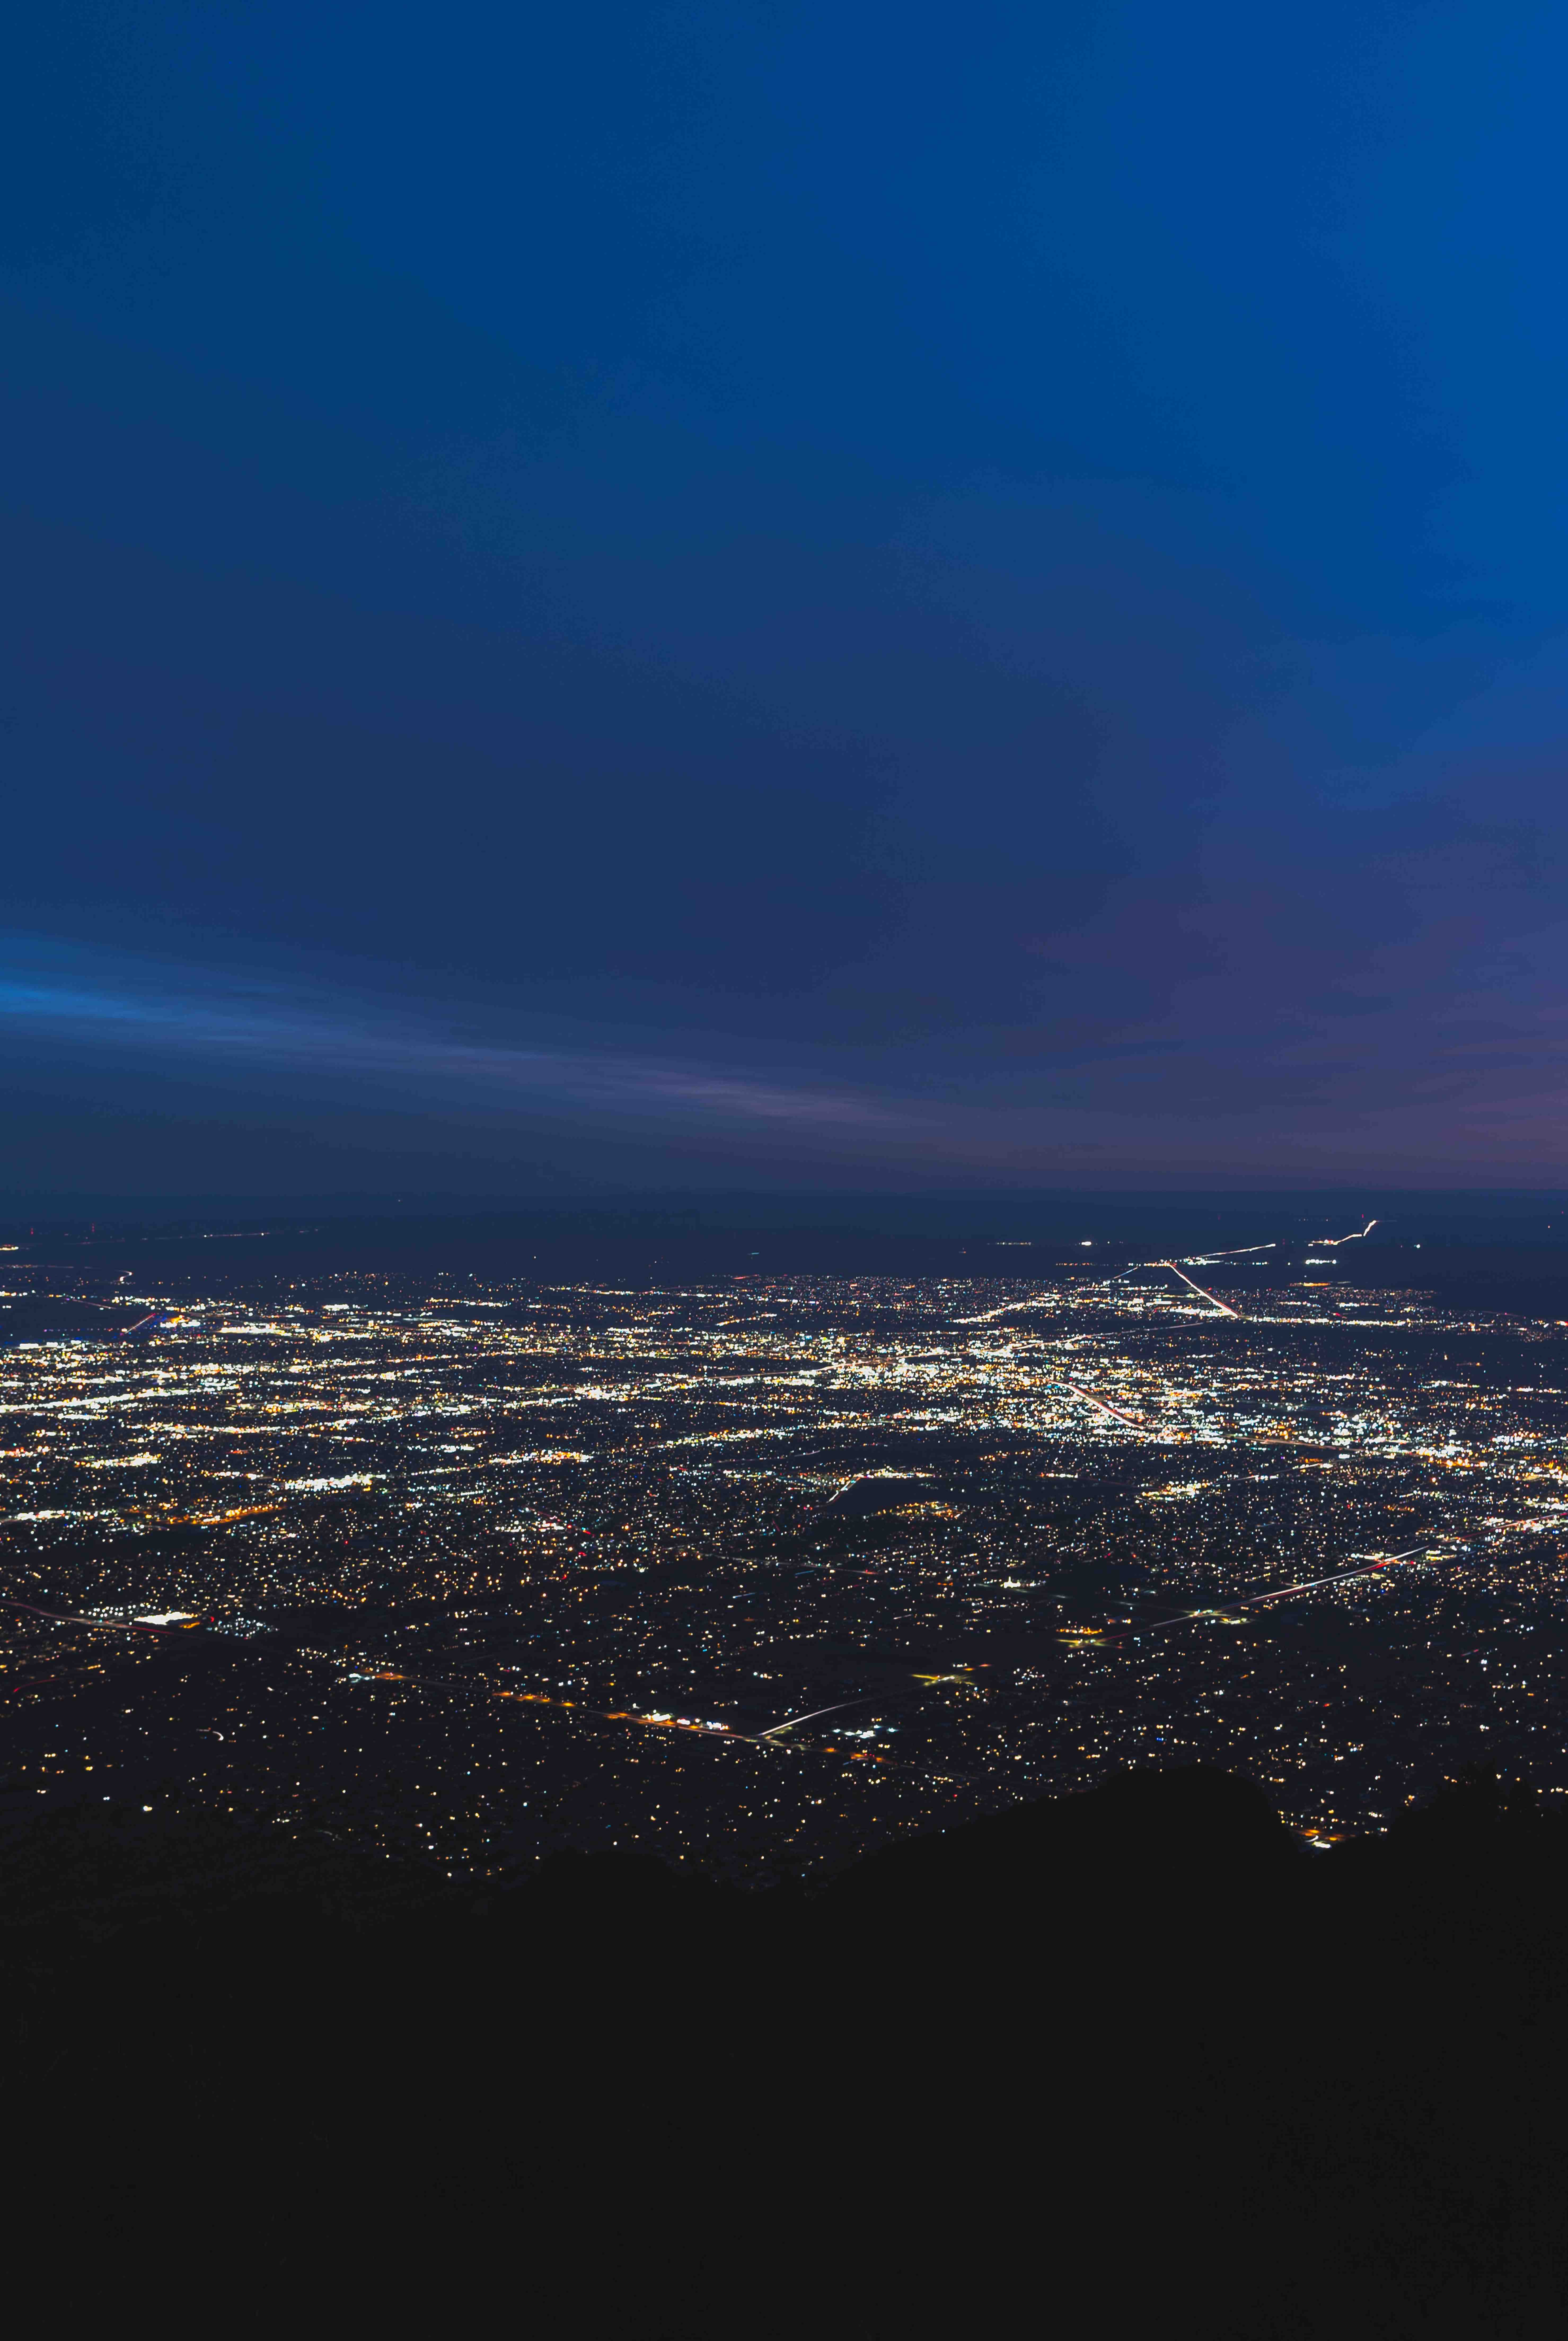 Albuquerque City Lights by This Christography